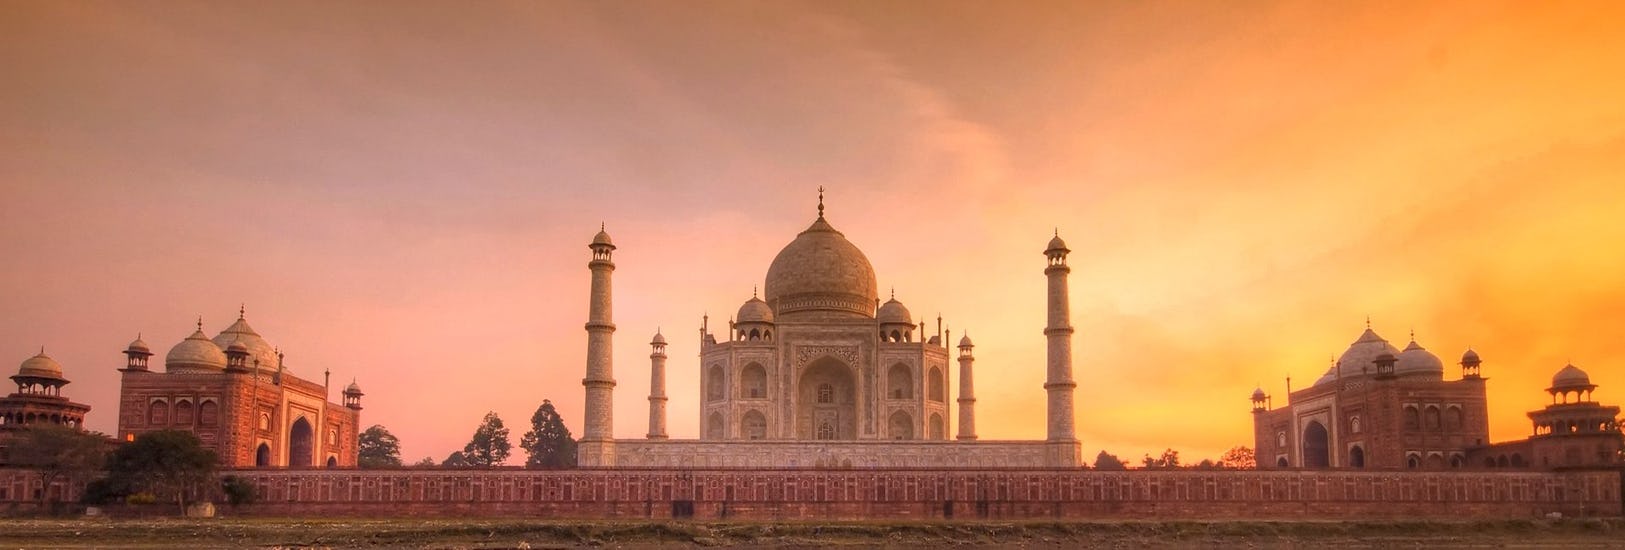 6 Nights 7 Days Golden Triangle Tour | Golden Triangle India Itinerary